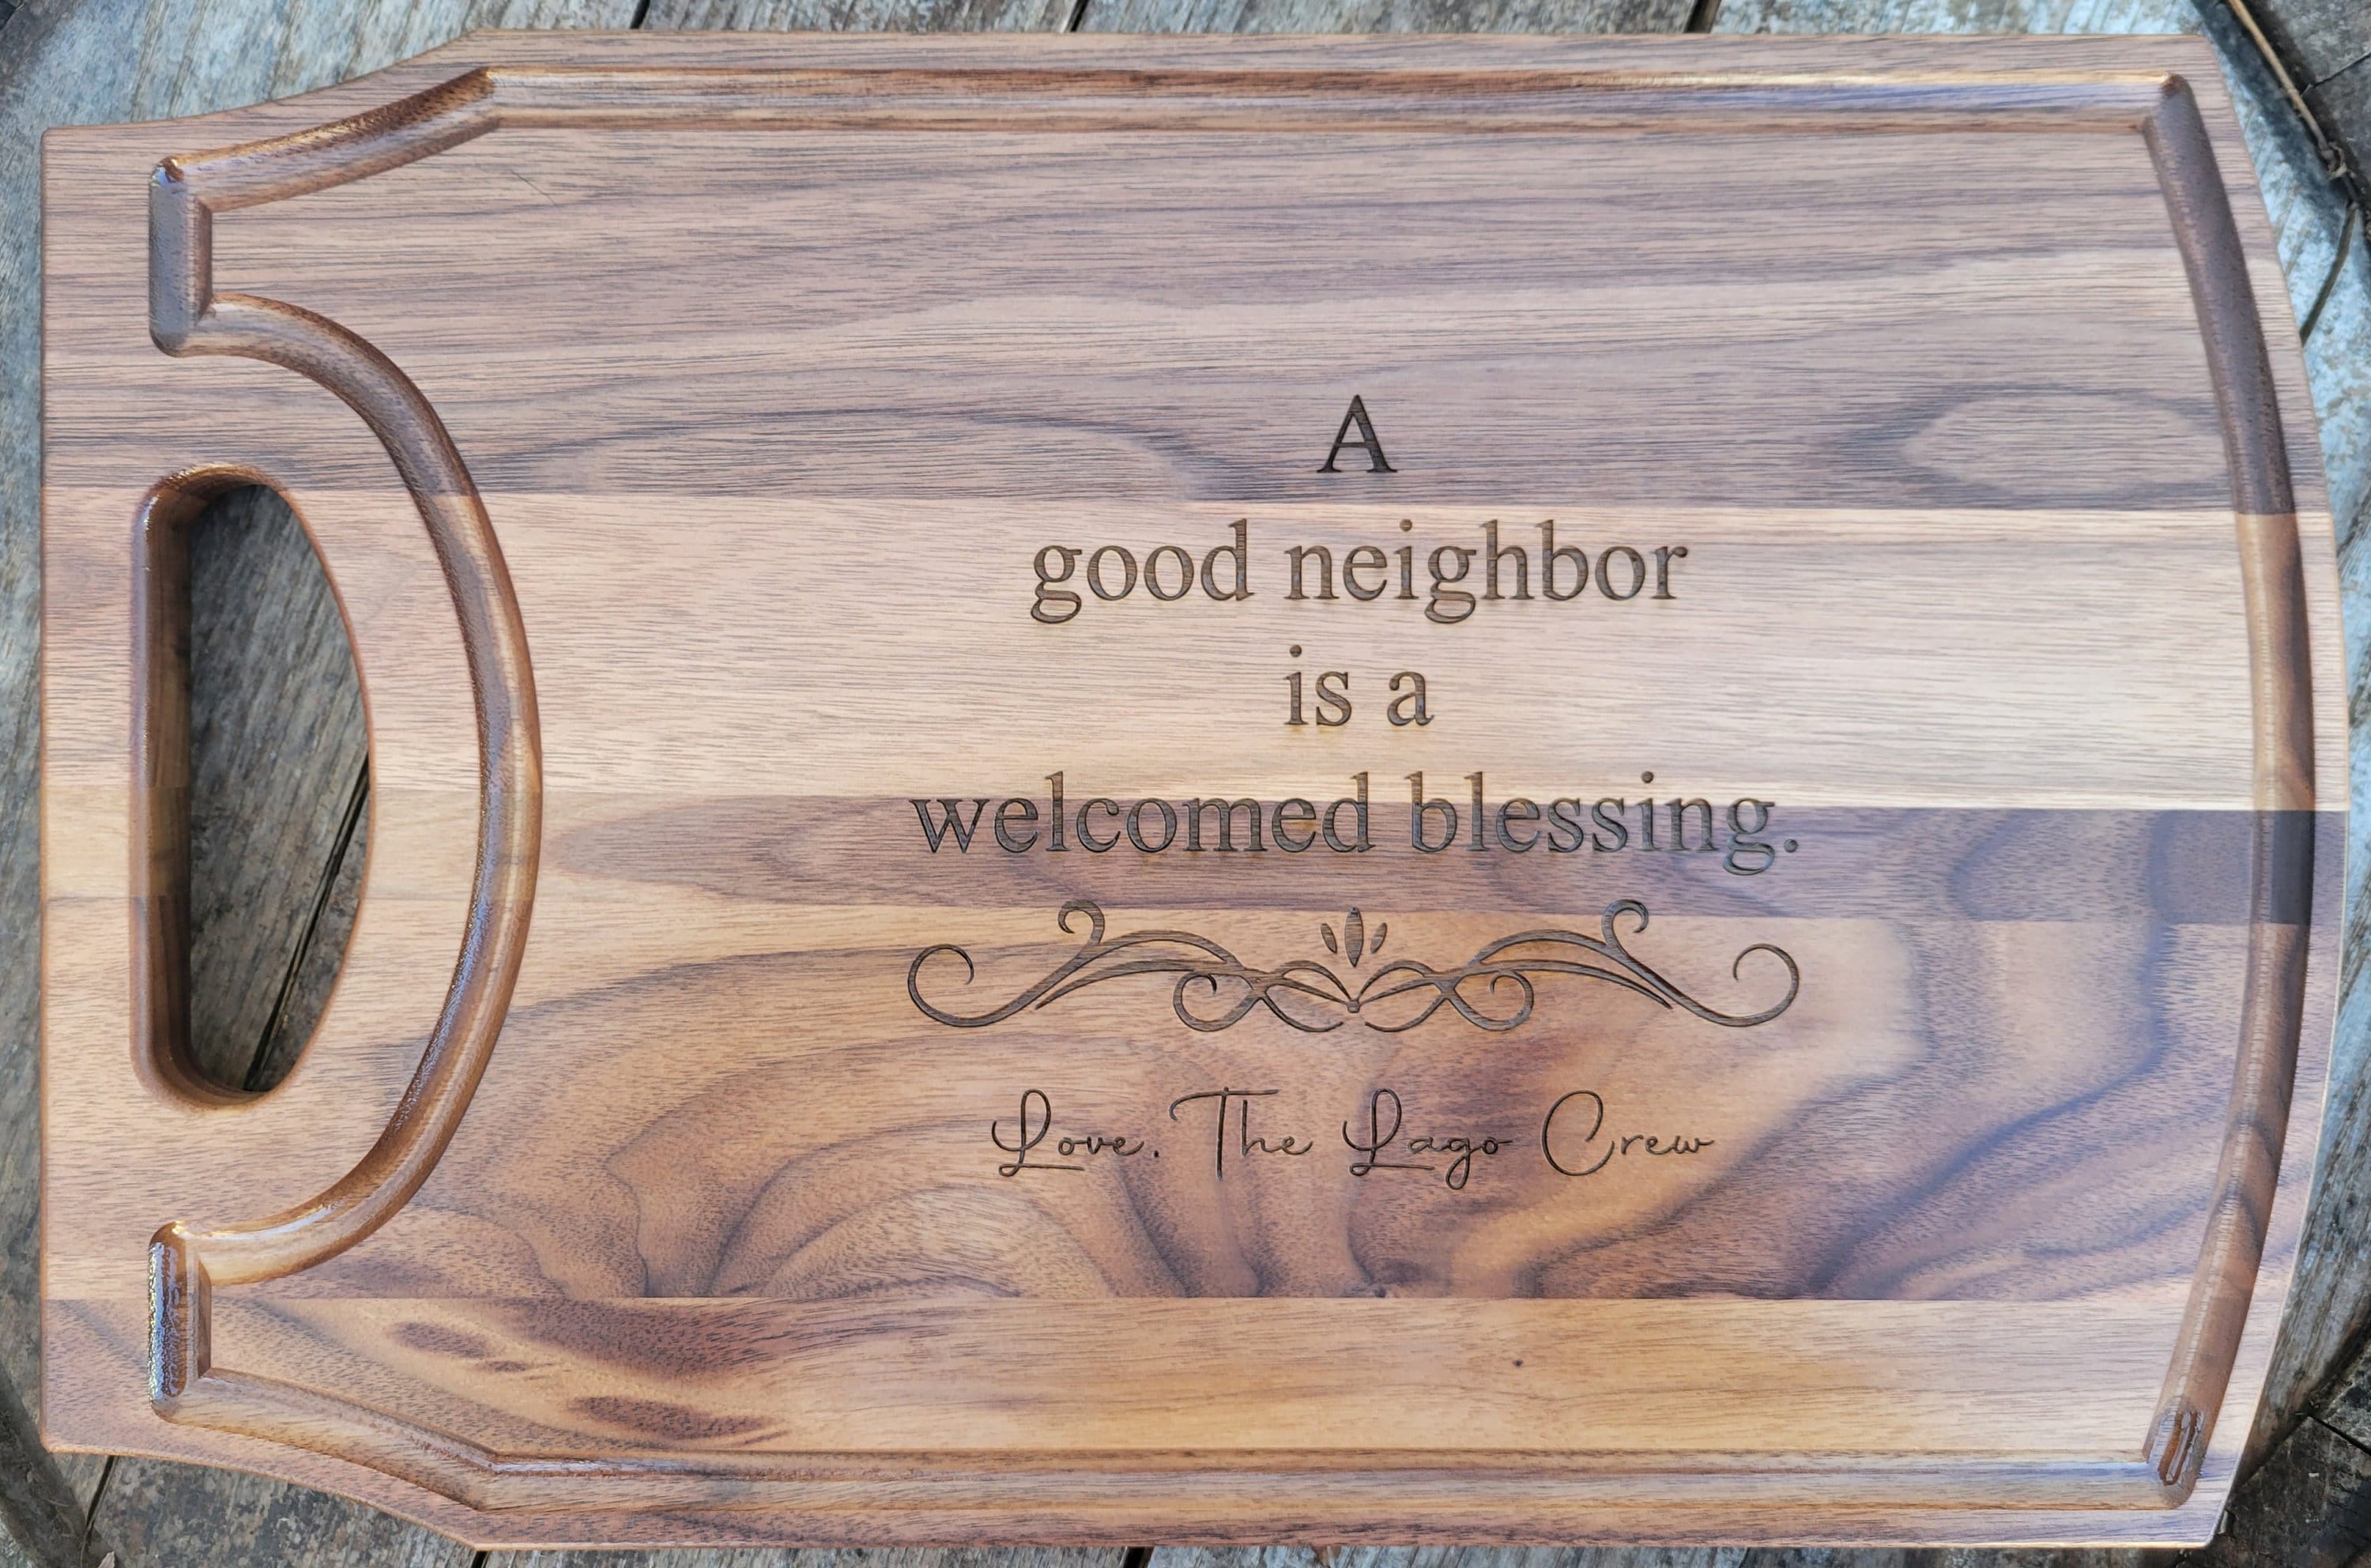  Neighbor Gift - A Good Neighbor is a Welcome Blessing